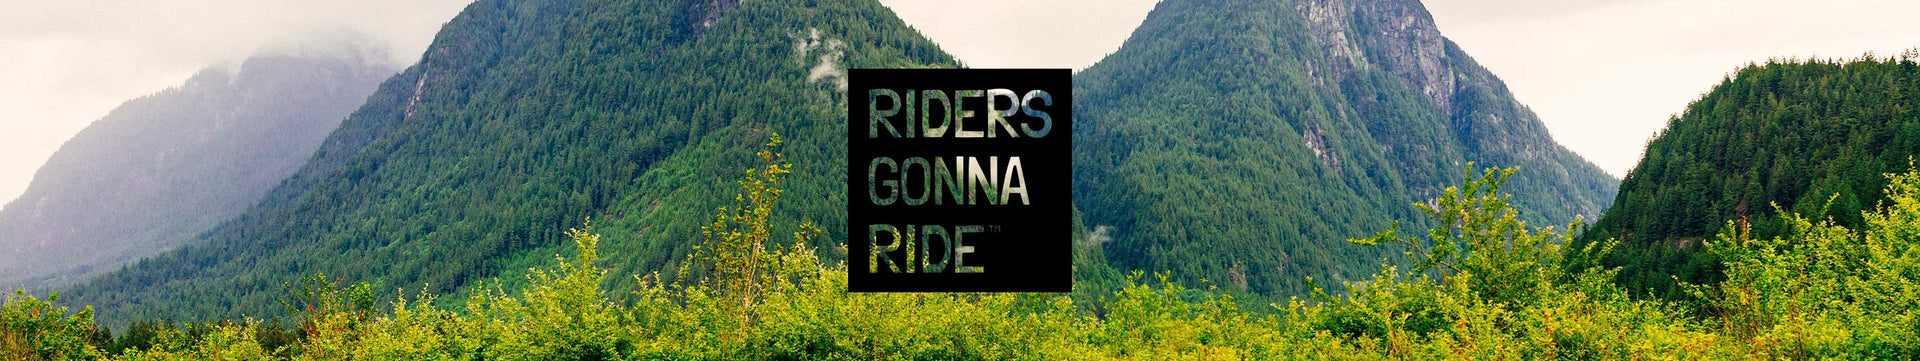 Top Seller - RIDERS GONNA RIDE®